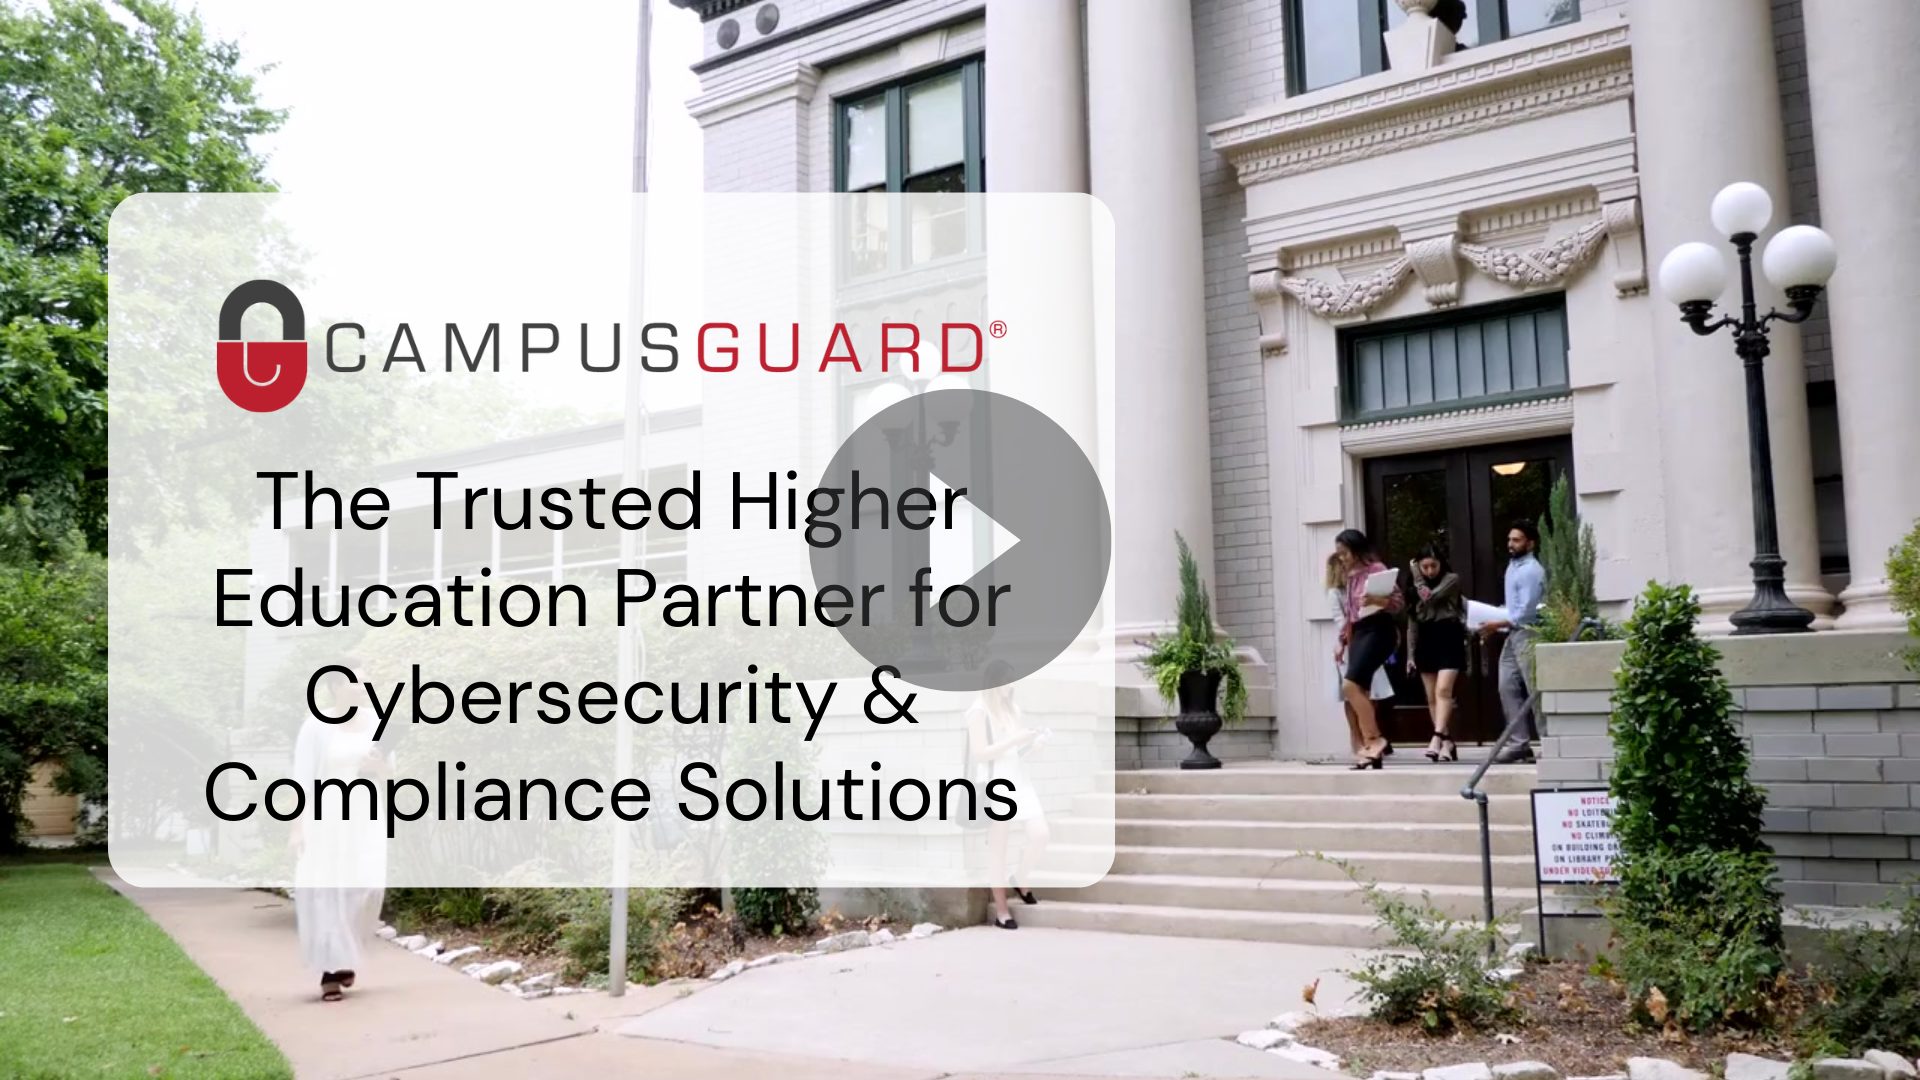 The Trusted Higher Education Partner for Cybersecurity & Compliance Solutions video